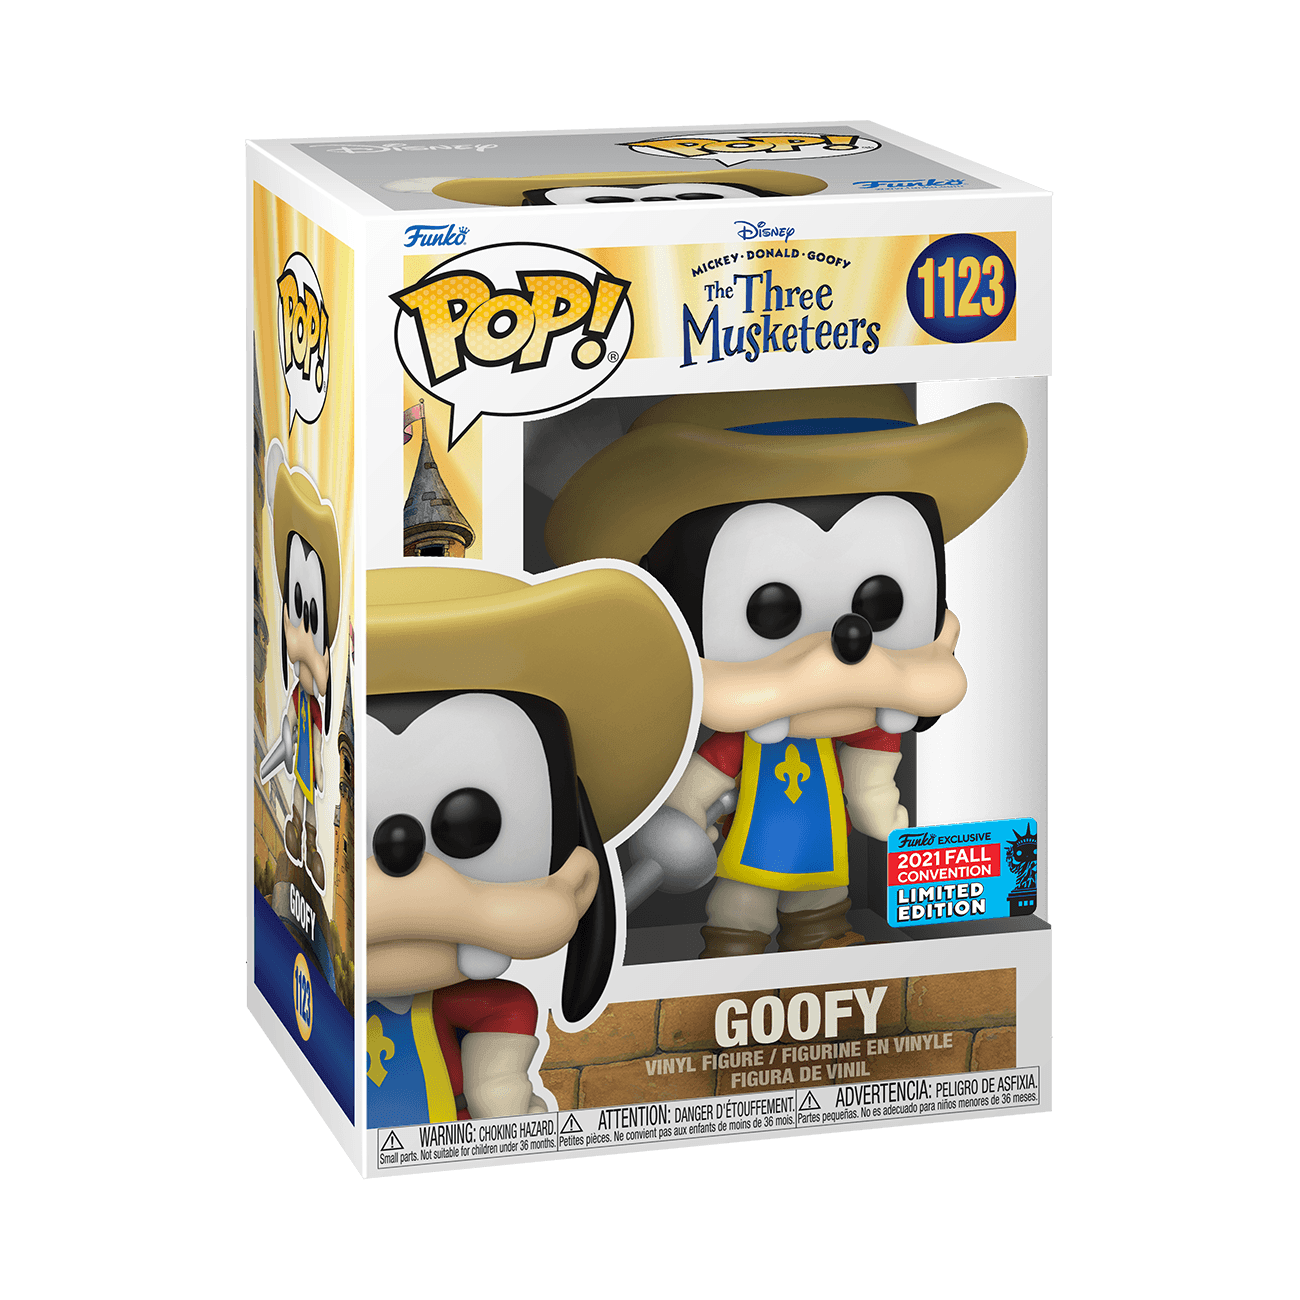 FUN58605 Mickey Mouse - Goofy Musketeer NYCC 2021 US Exclusive Pop! Vinyl [RS] - Funko - Titan Pop Culture